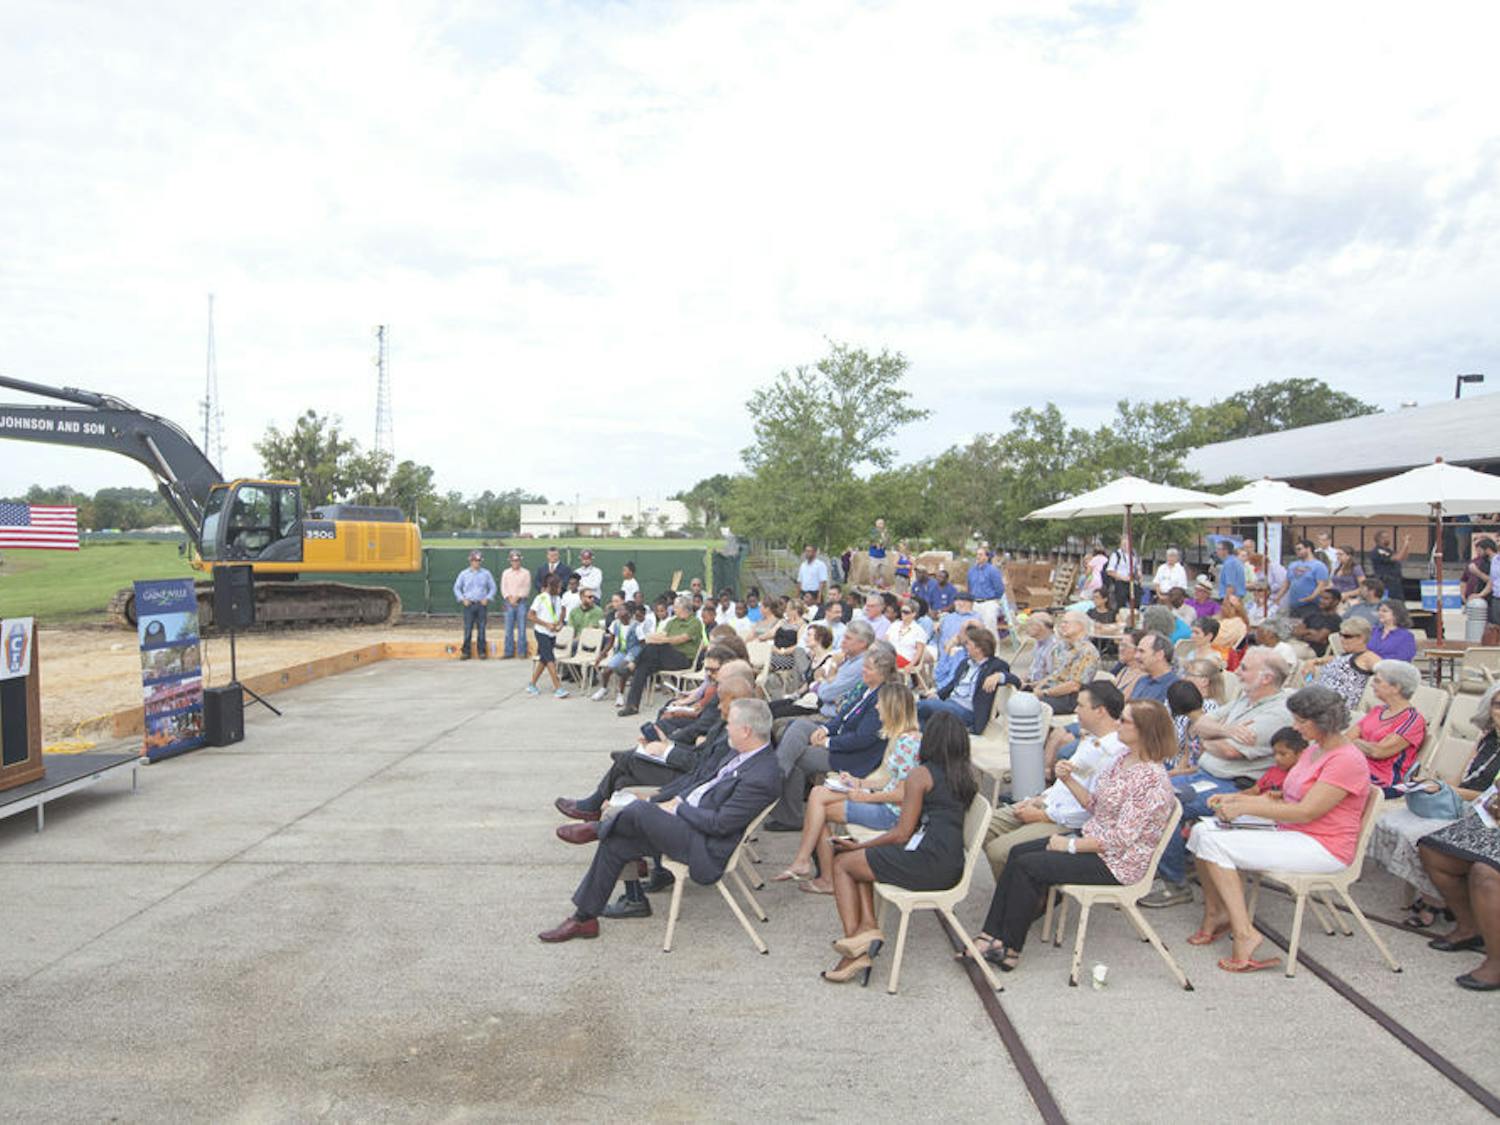 The Depot Park groundbreaking ceremony featured speakers like former Gainesville city mayor Pegeen Hanrahan. The park had been contaminated with coal power plant waste 19 years ago and an enormous effort has been put toward the cleanup, Hanrahan explained.